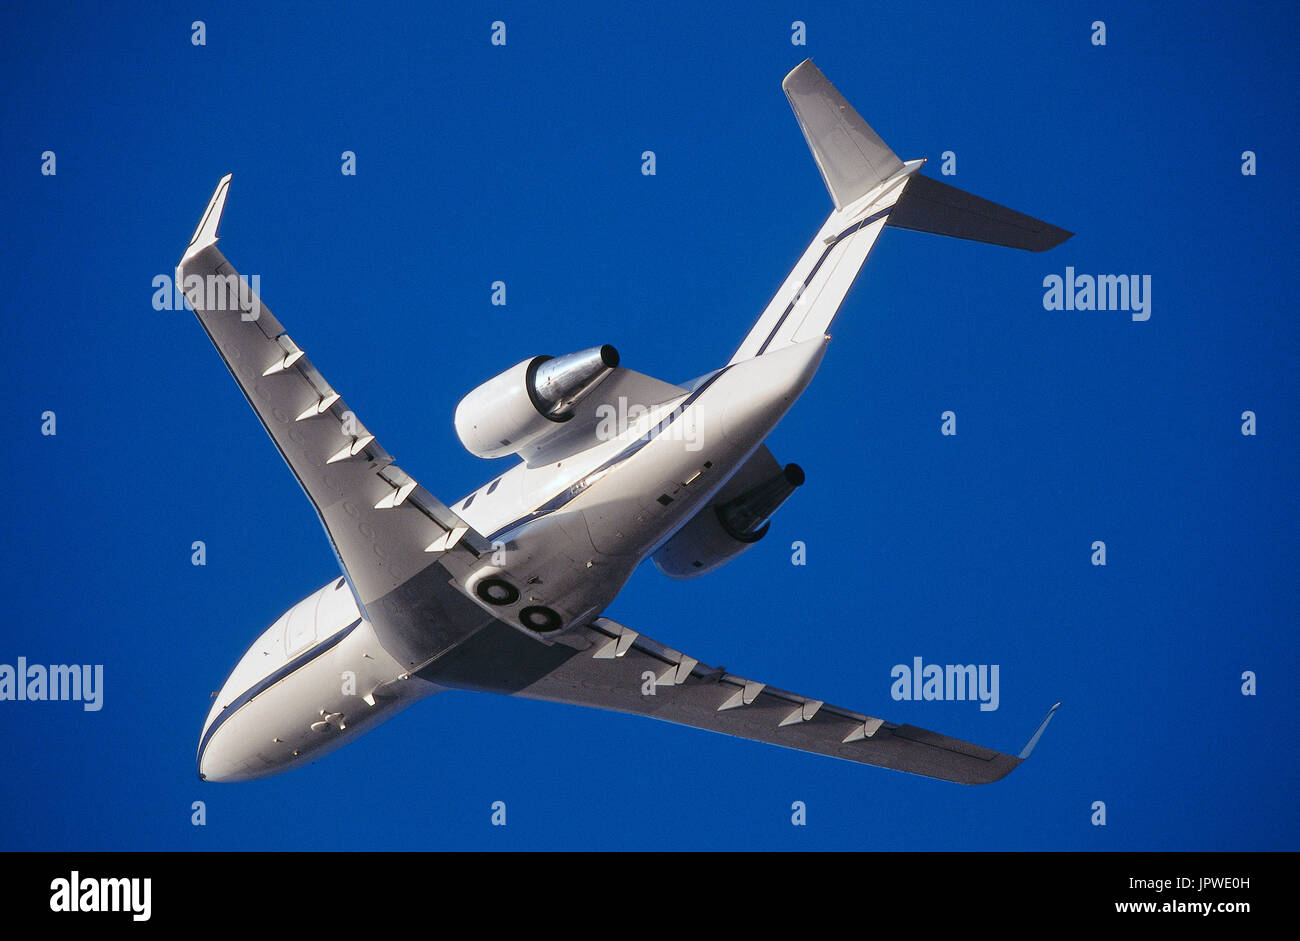 Bombardier Challenger CL-600 flying enroute Stock Photo